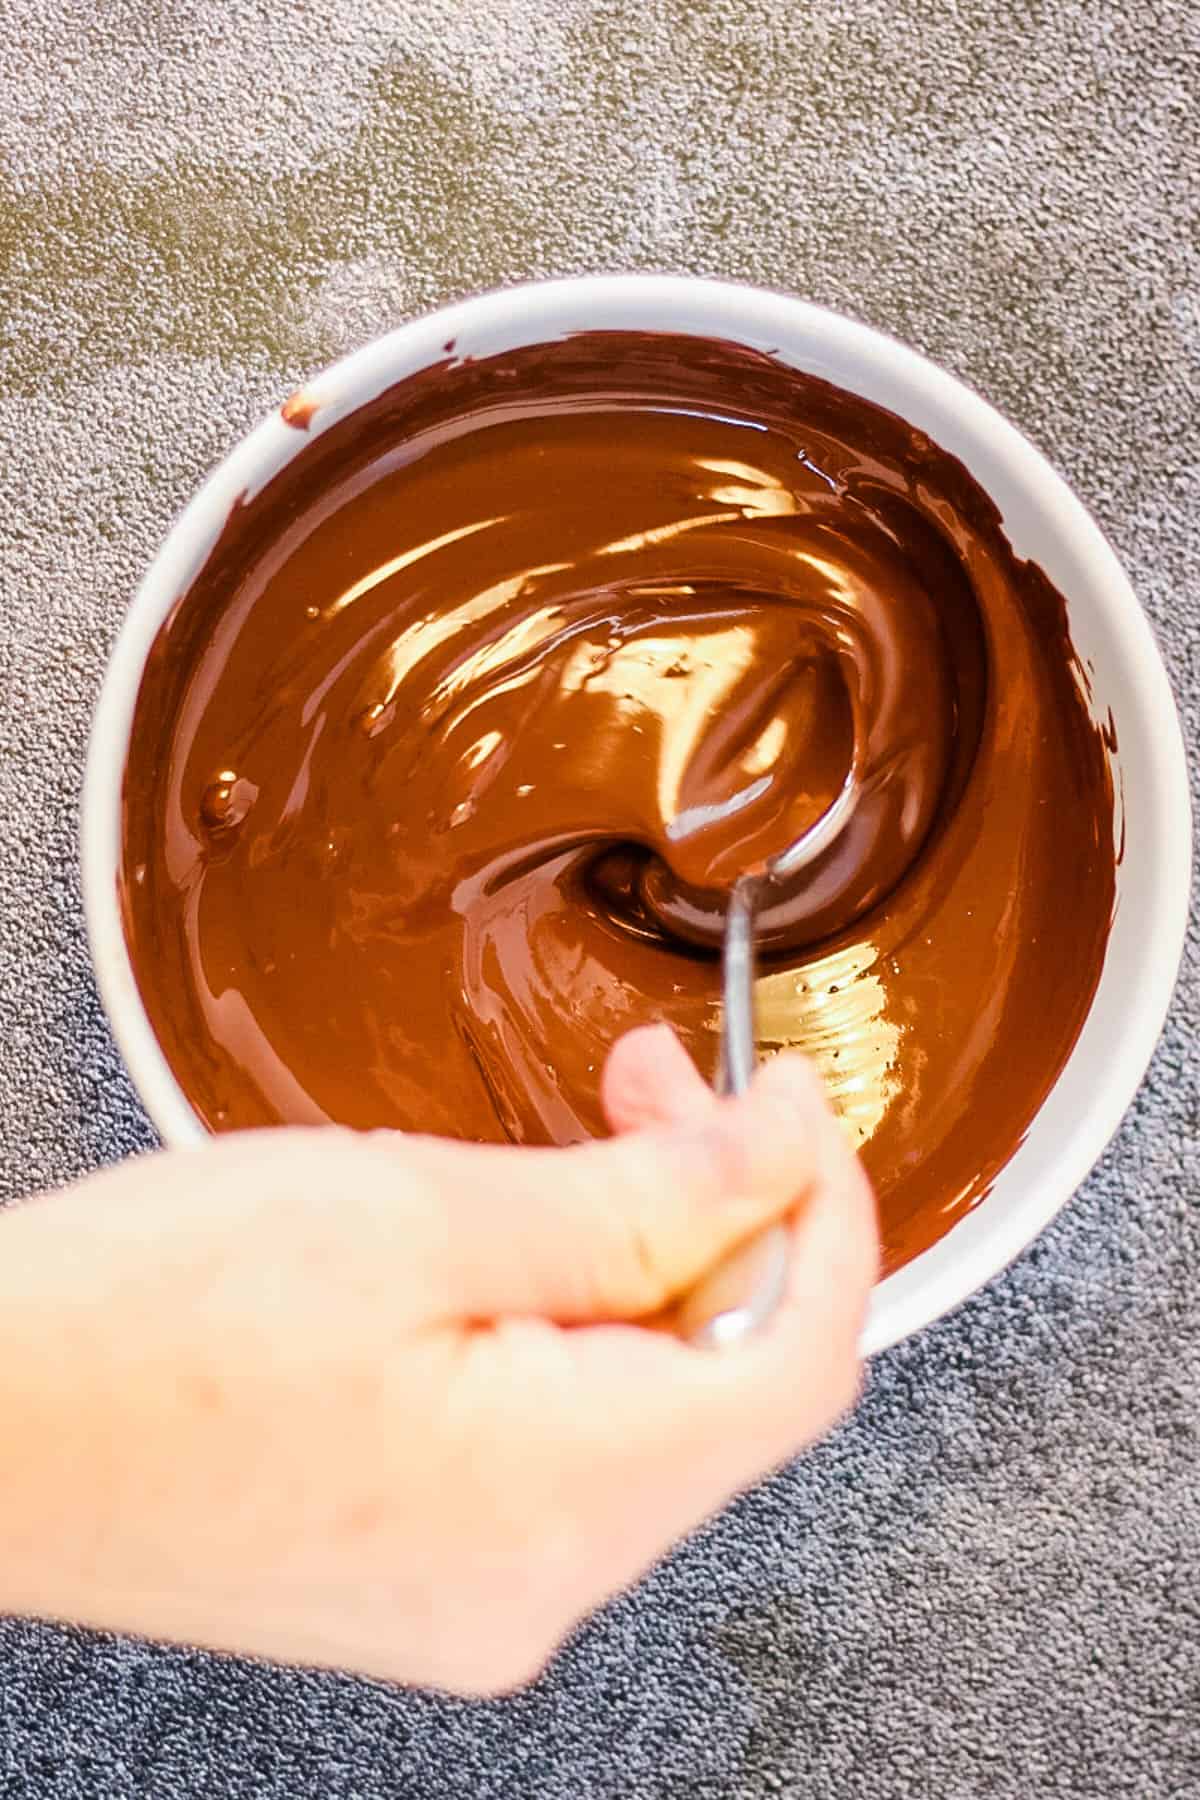 stirring the melted chocolate.